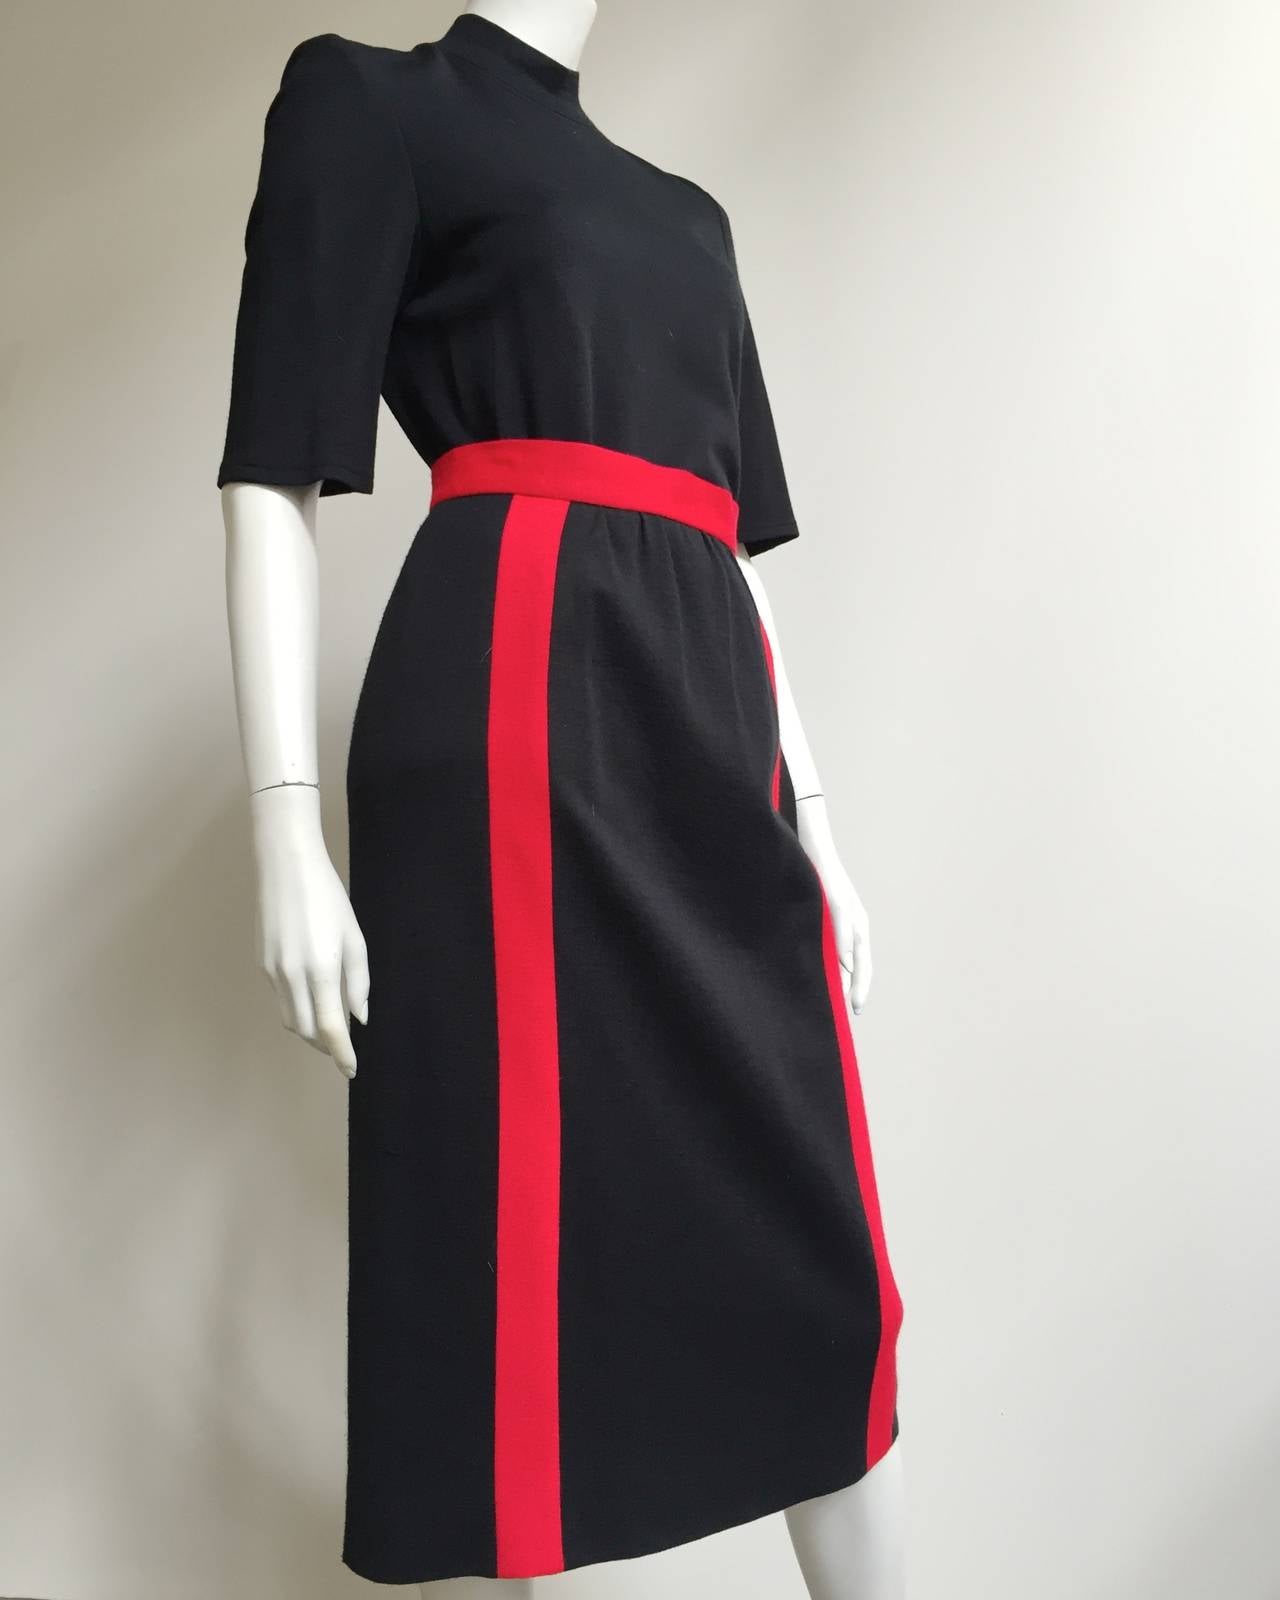 Carven 60s Knit Top & Skirt Size 6. 2